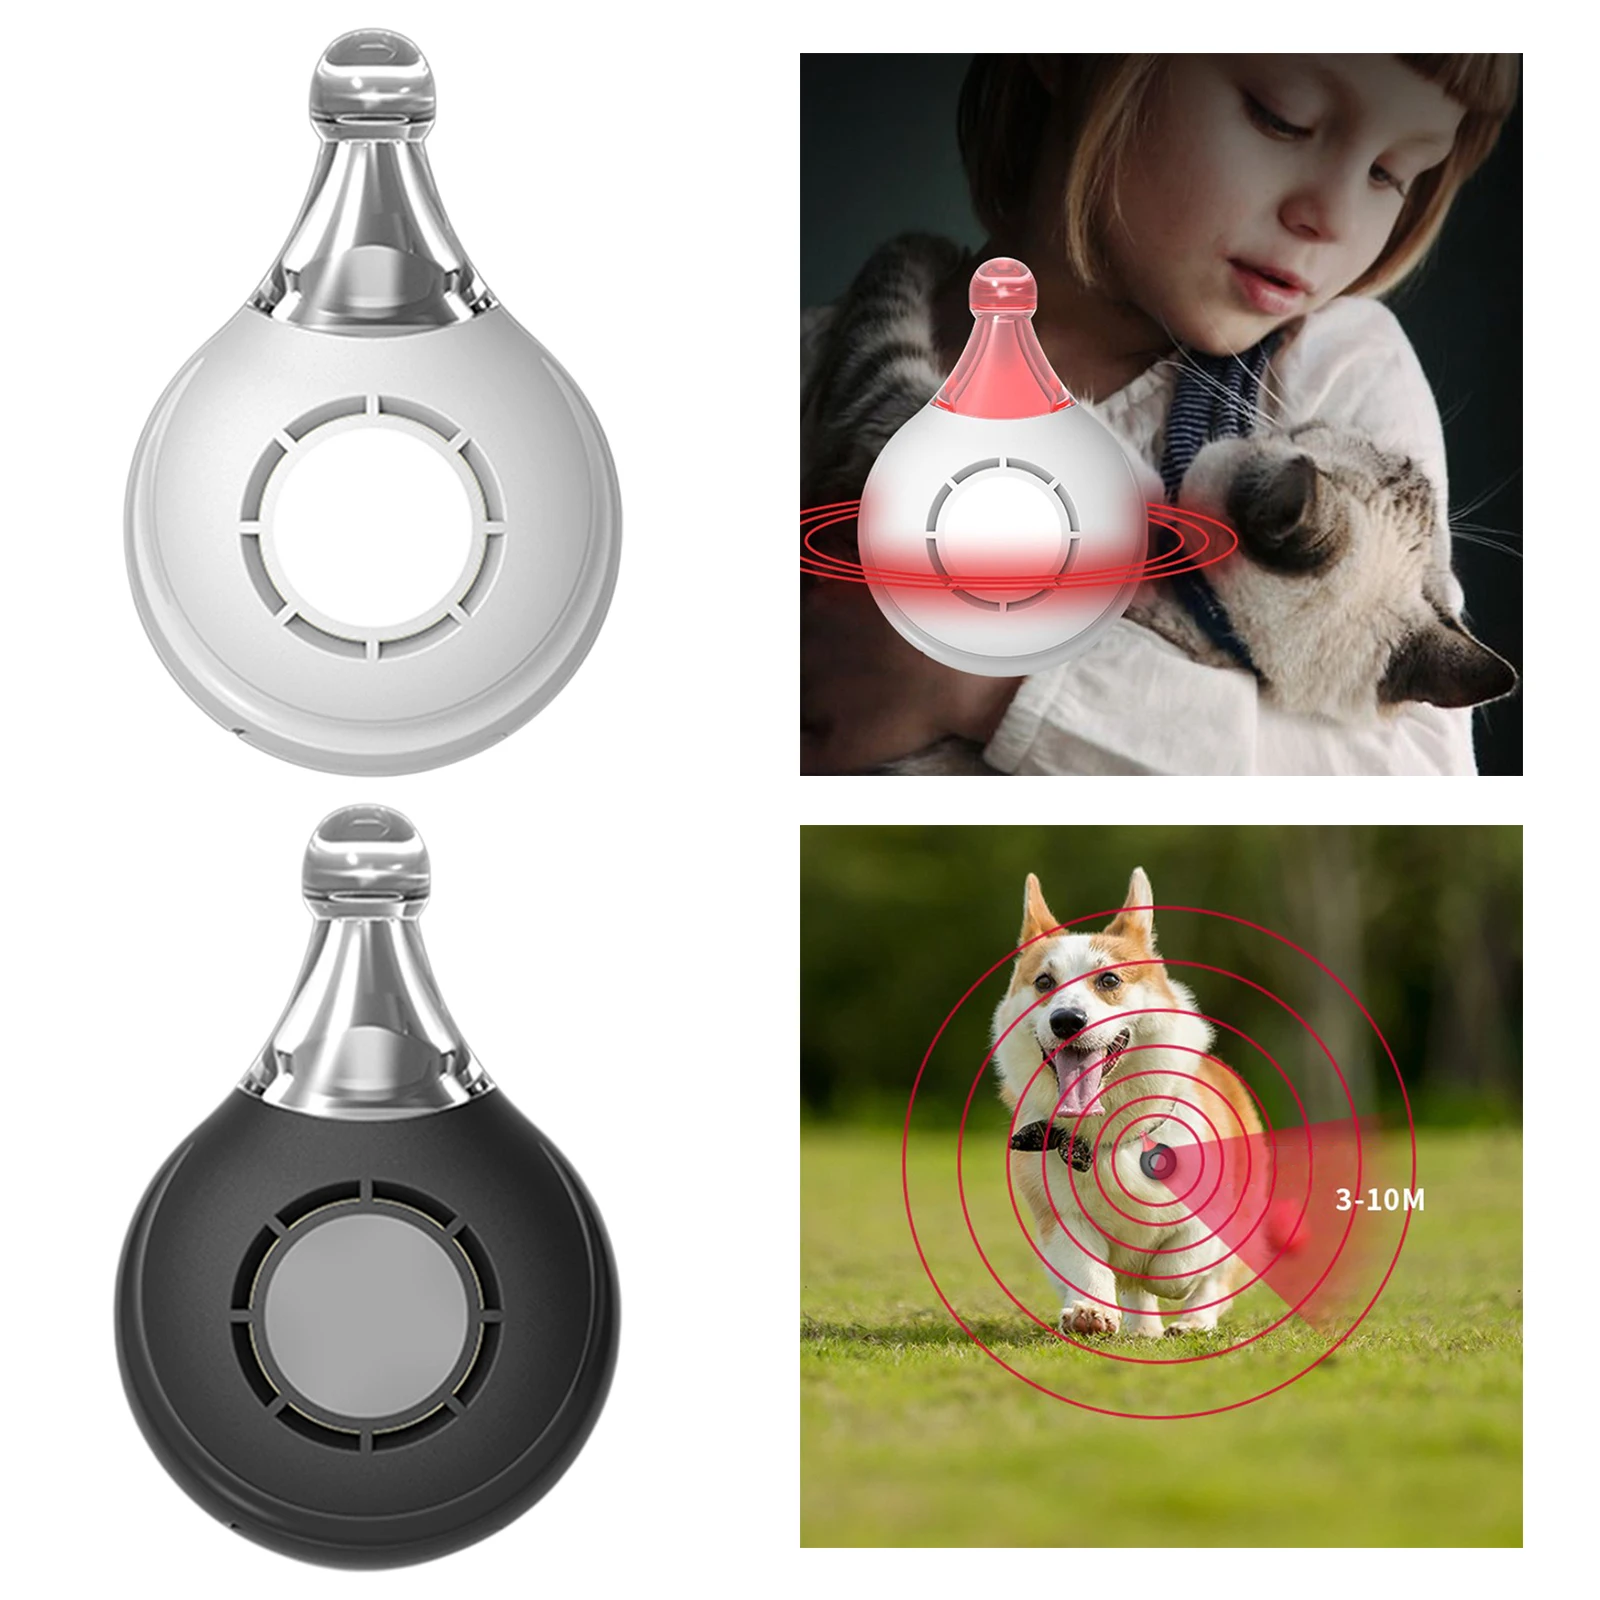 Ultrasonic Pest Repellent, Durable Mosquitoes Insects Repellent, USB Rechargeable Dogs Cats Fleas Ticks Louse Repelling Device